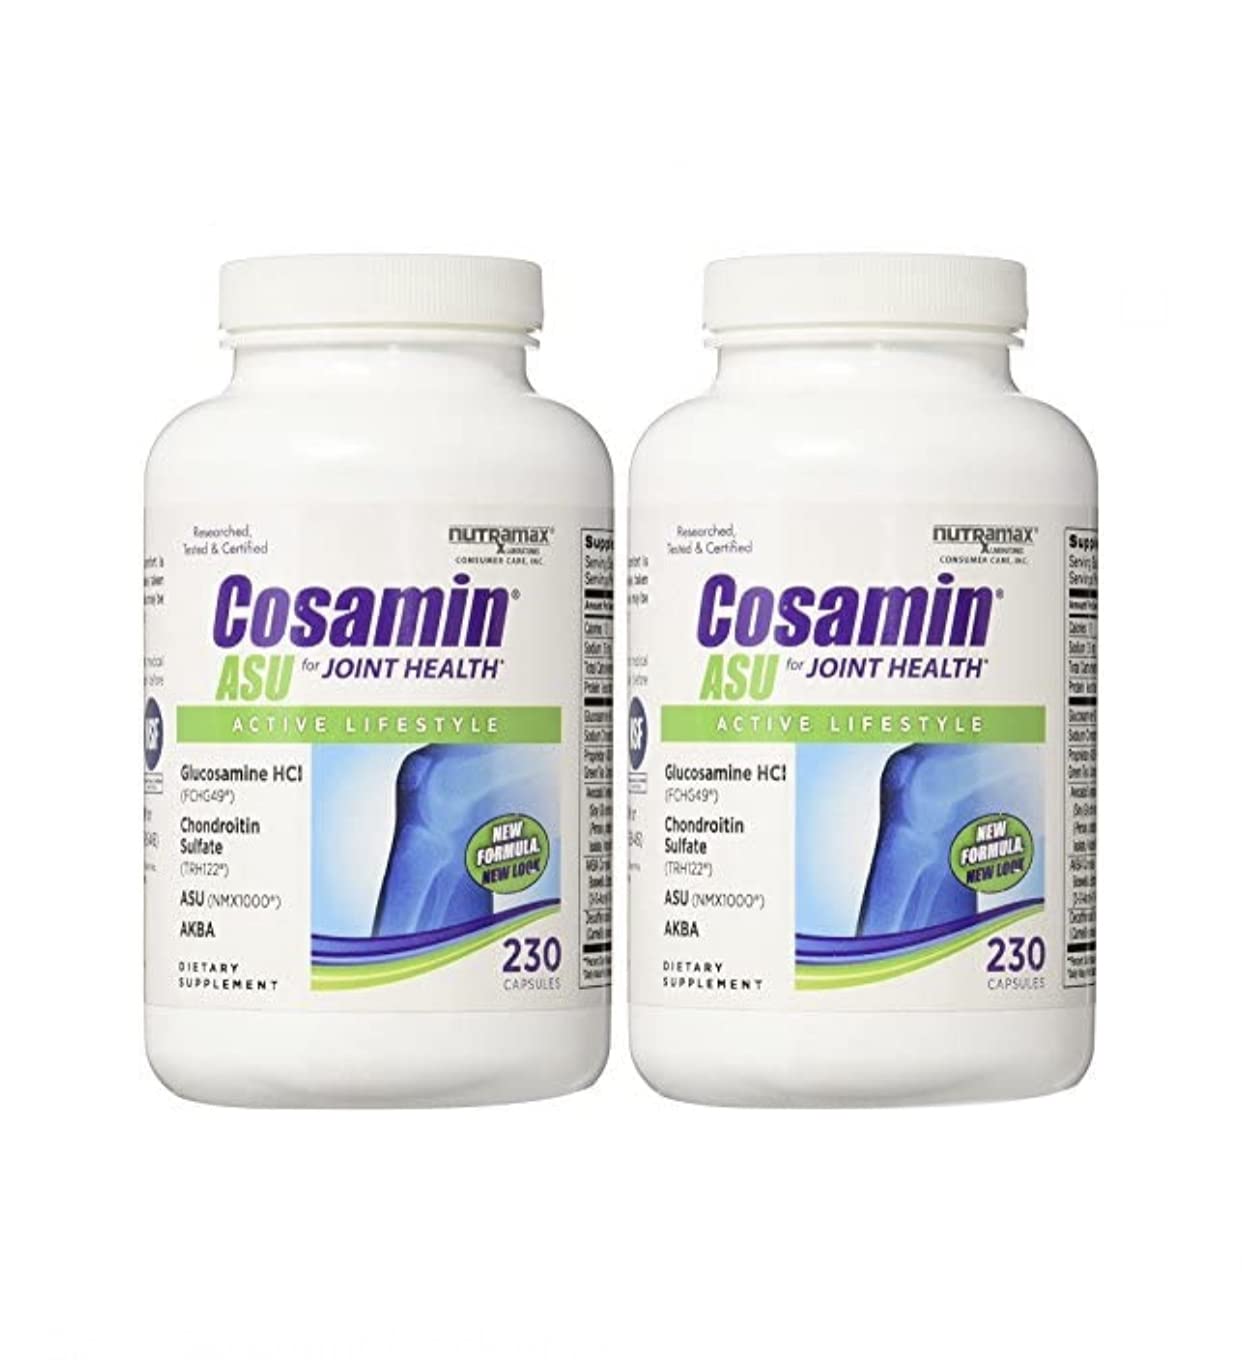 Cosamin ASU Joint Health Active Lifestyle Glucosamine HCl Chondroitin Sulfate AKBA 230 capsules (2... by Cosamin DS